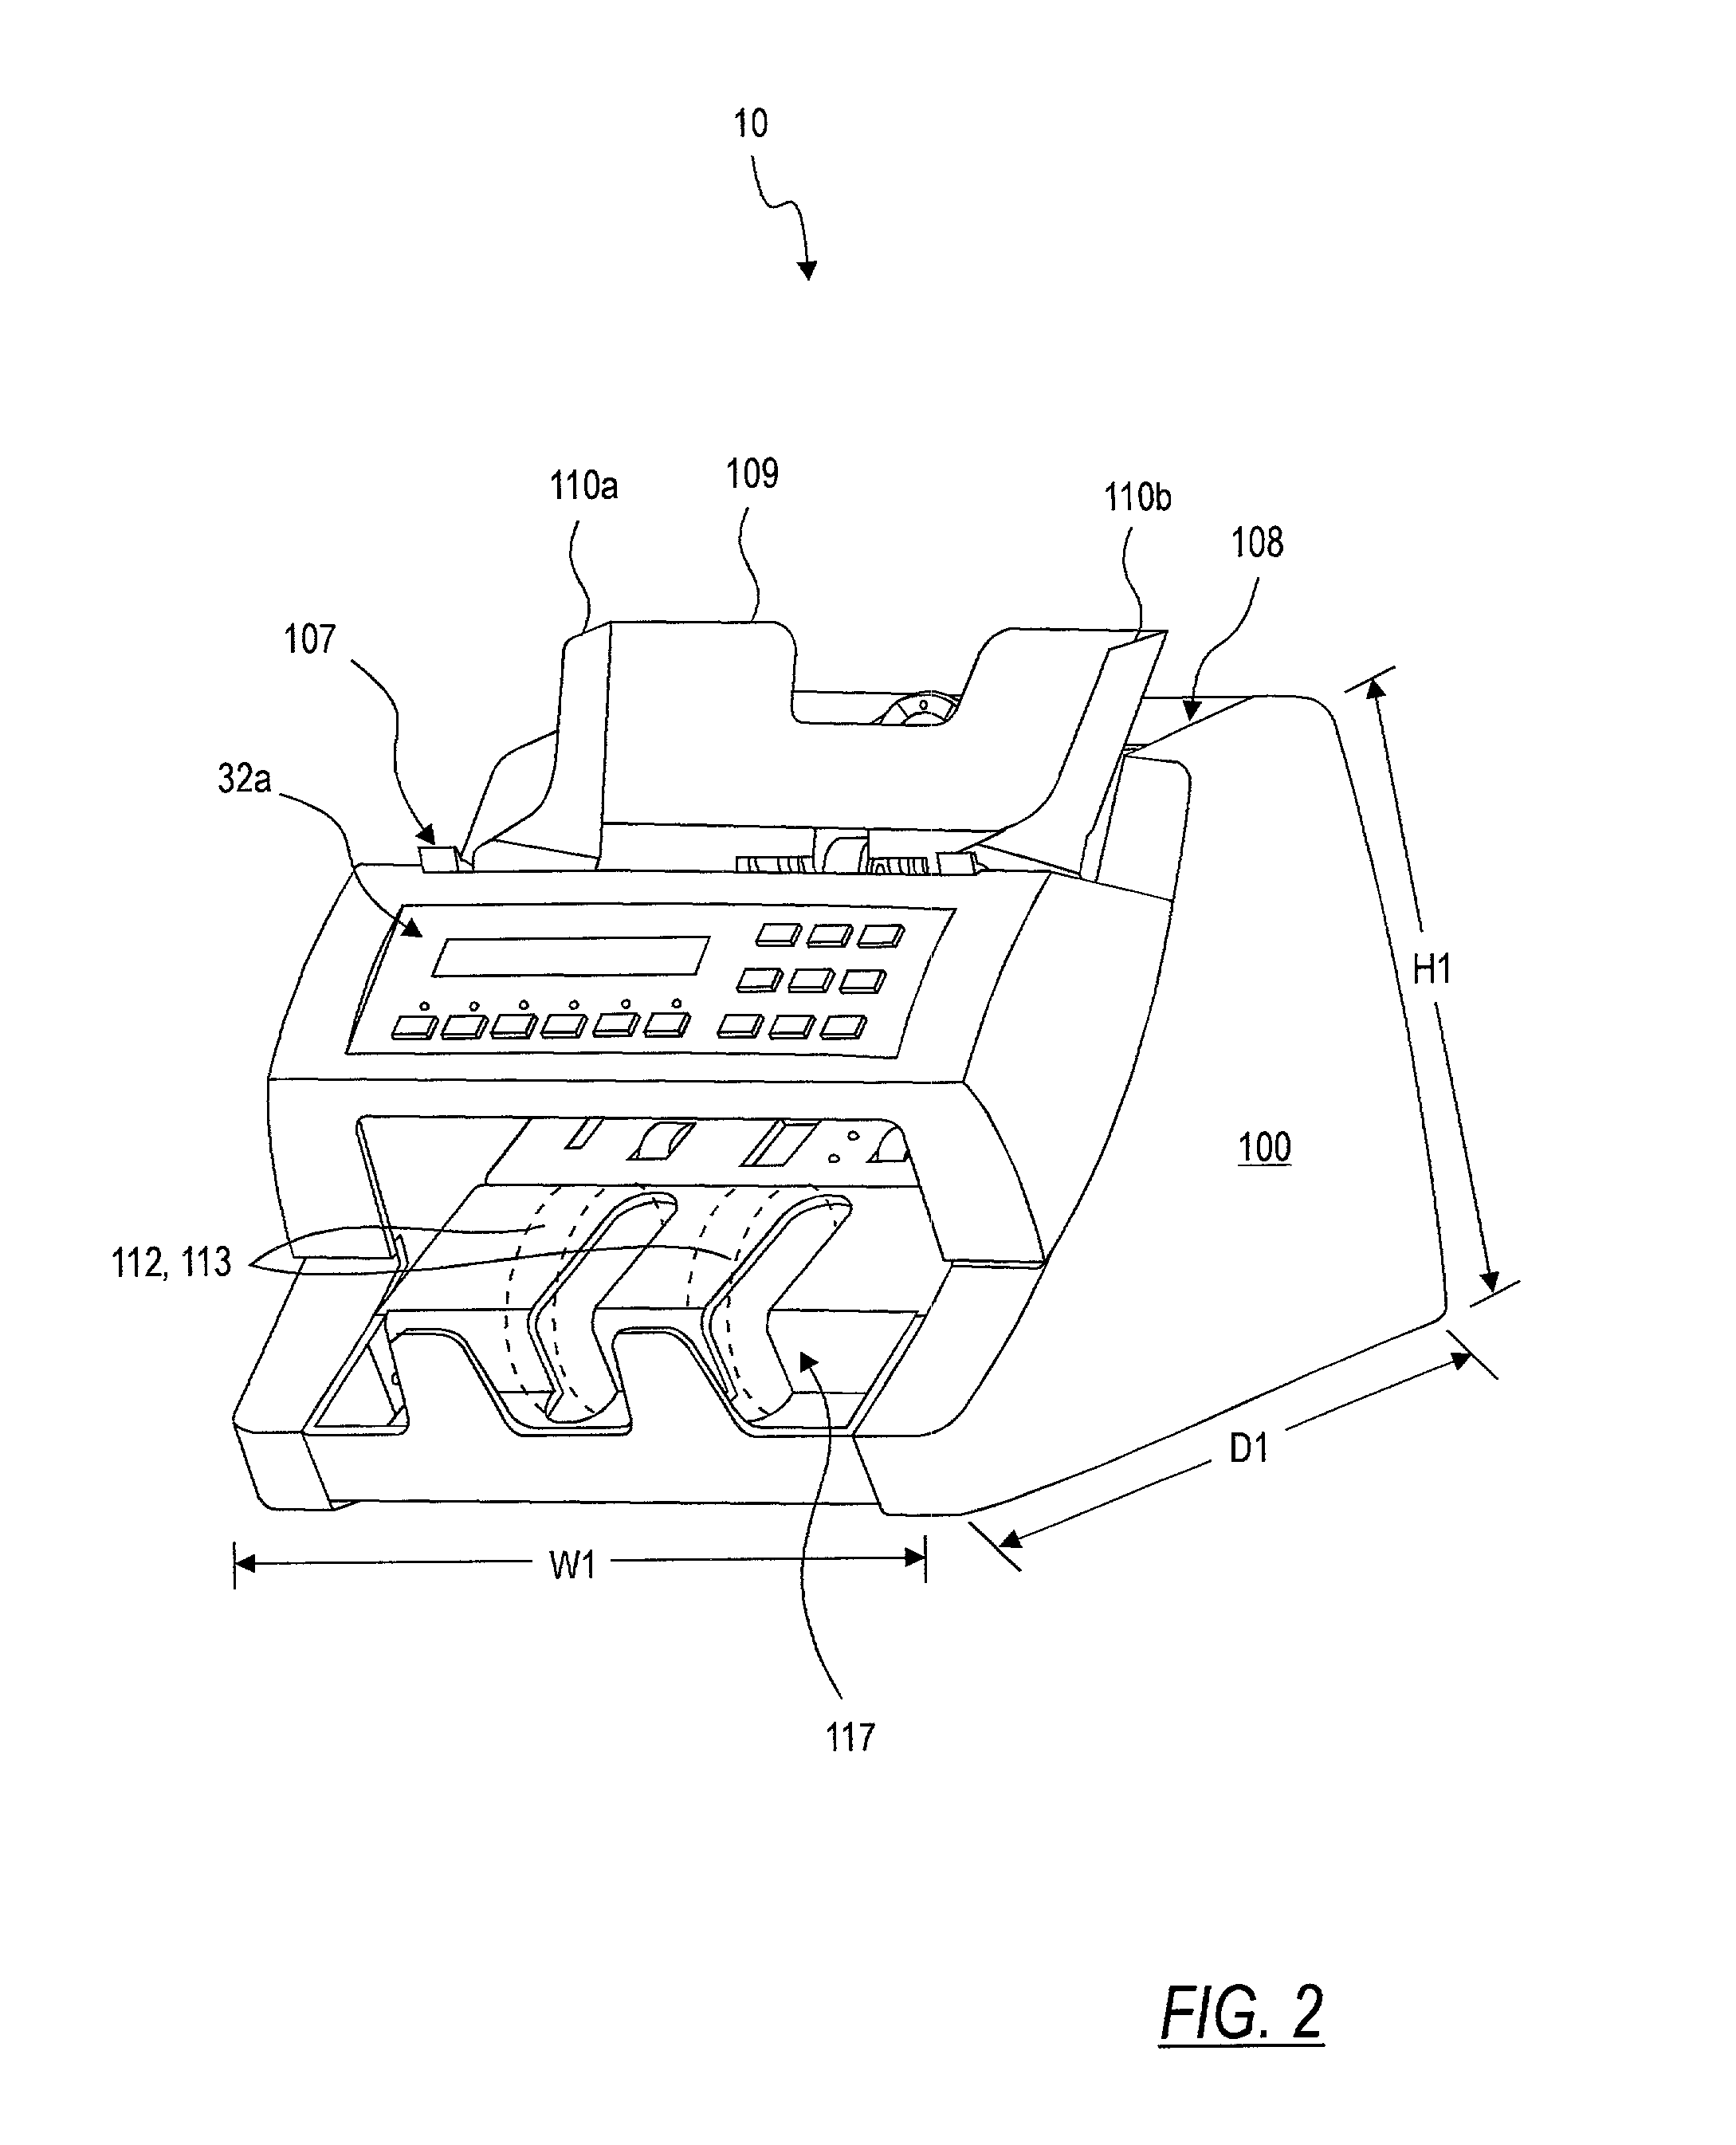 Method and apparatus for detecting doubled bills in a currency handling device